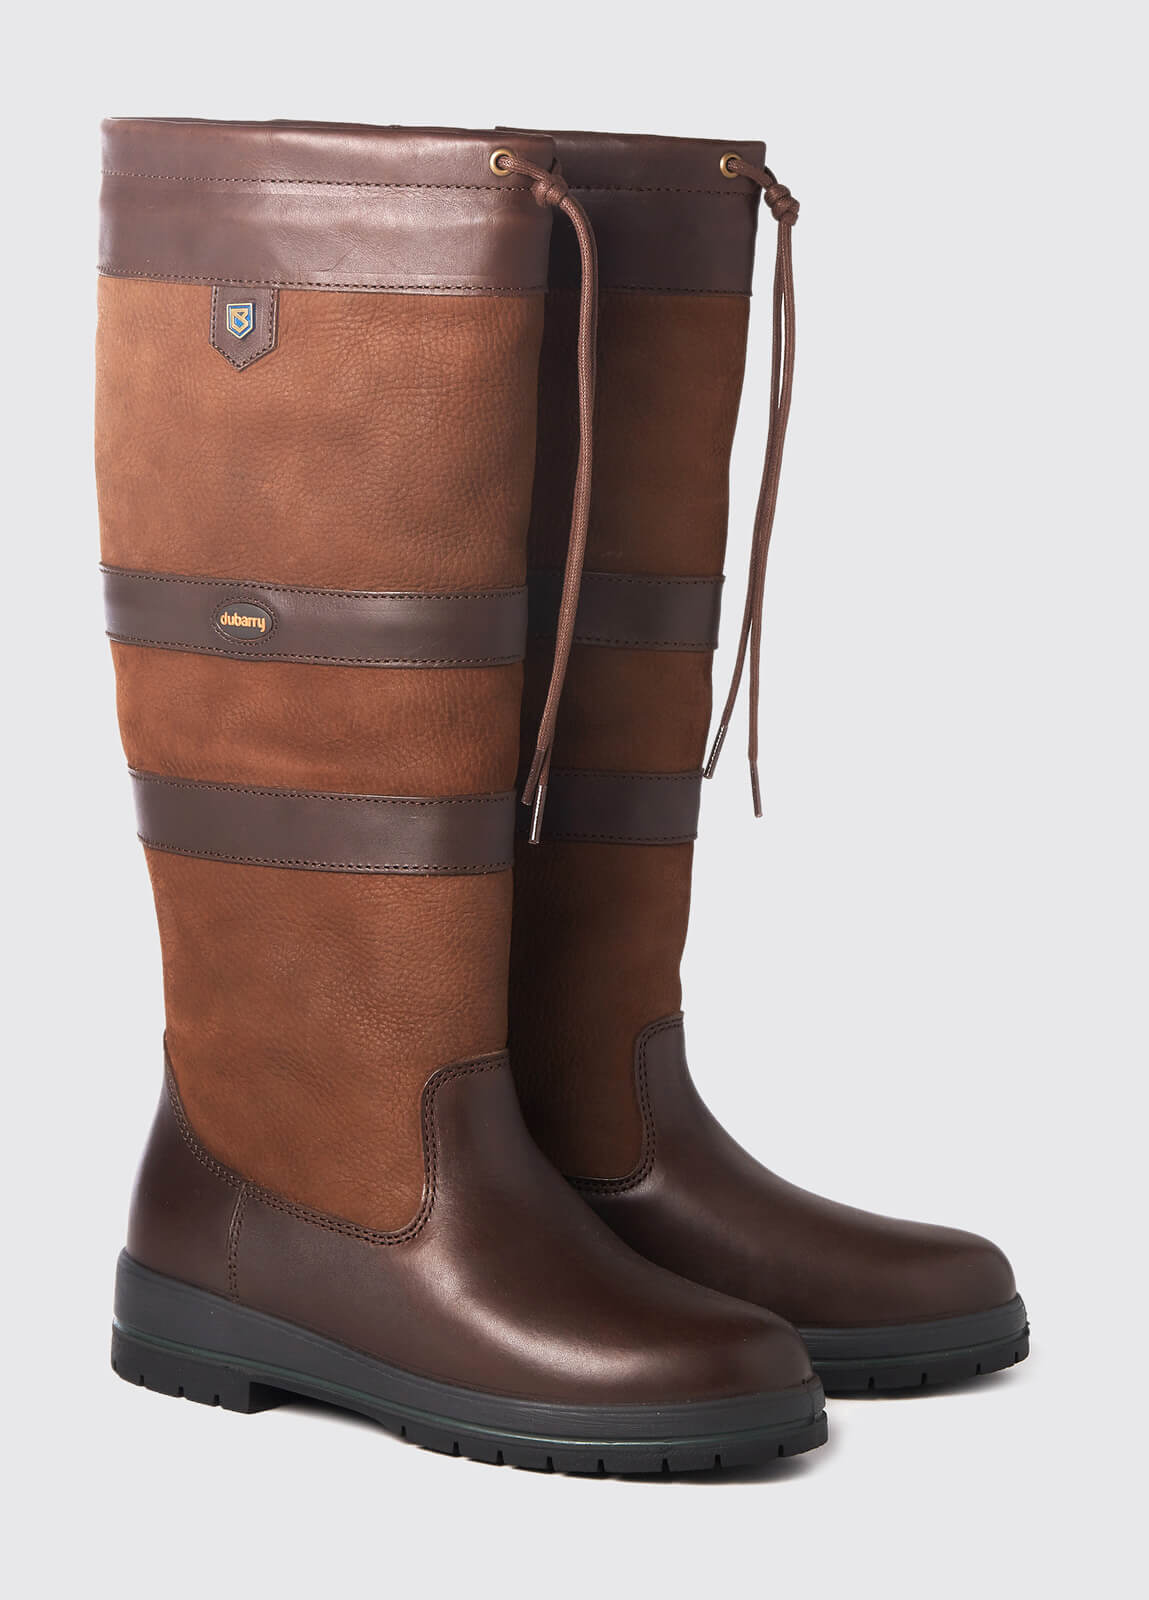 wide fitting boots ireland